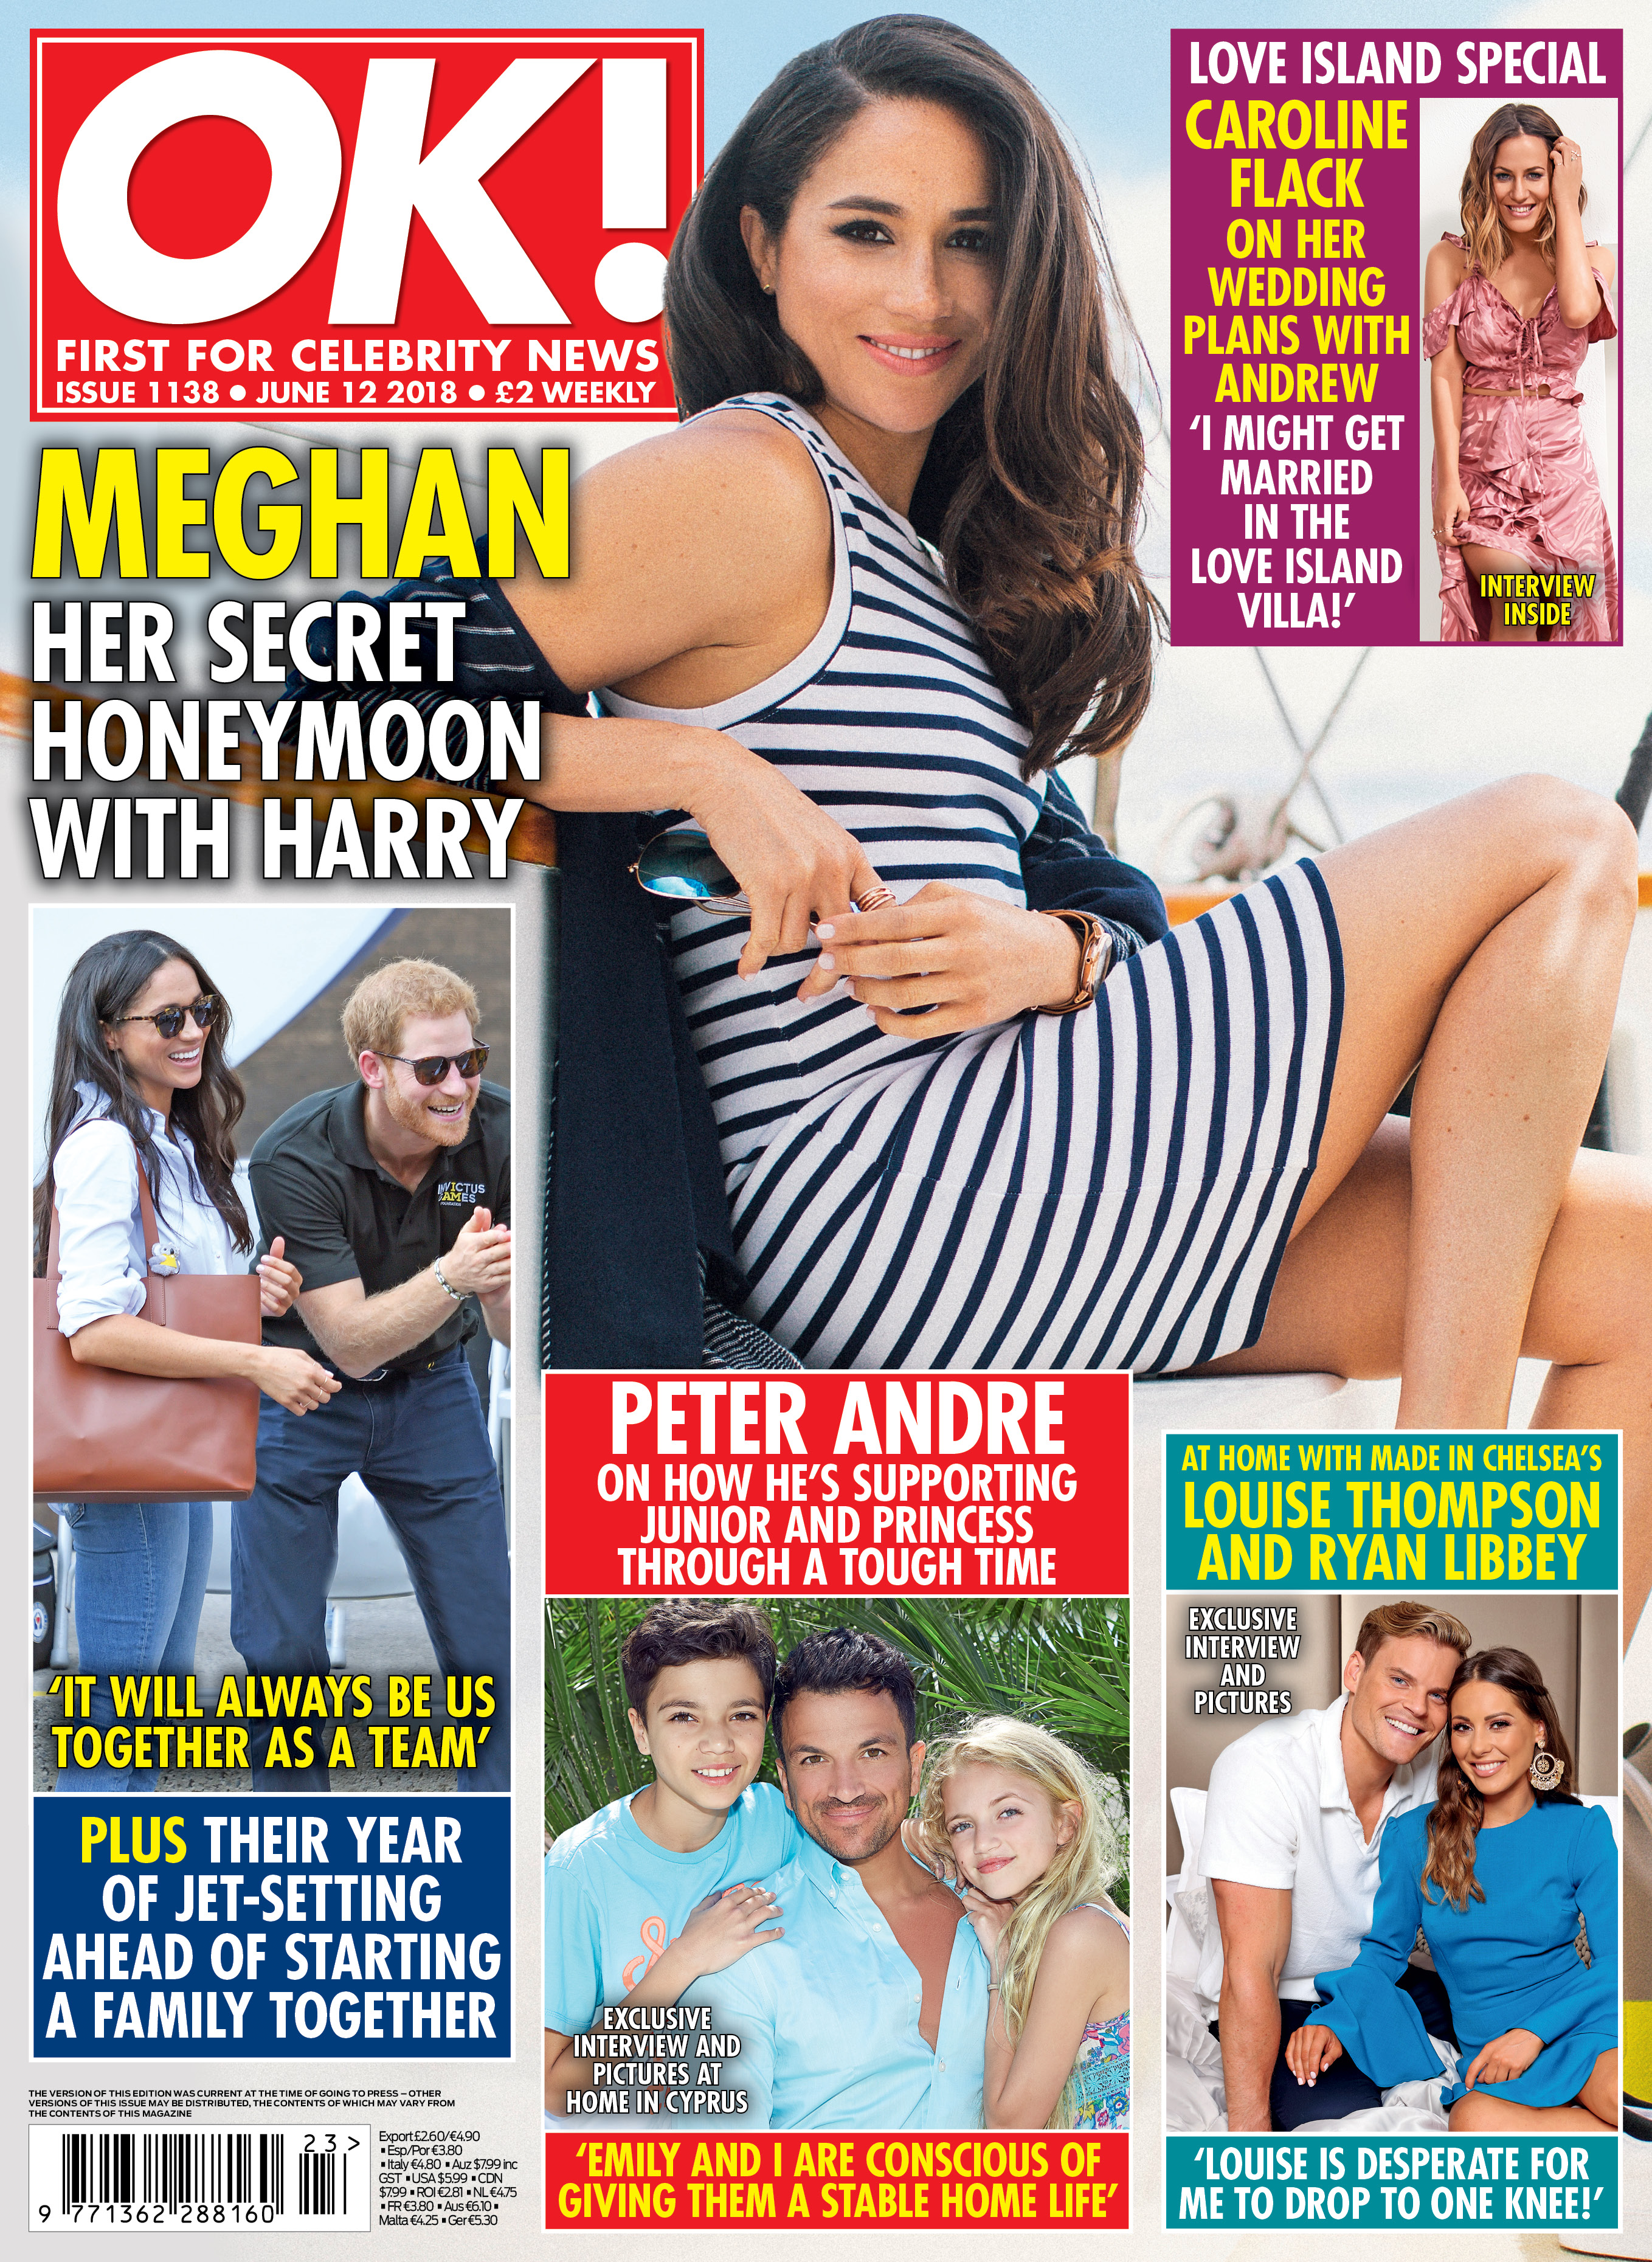 The cover of OK! magazine